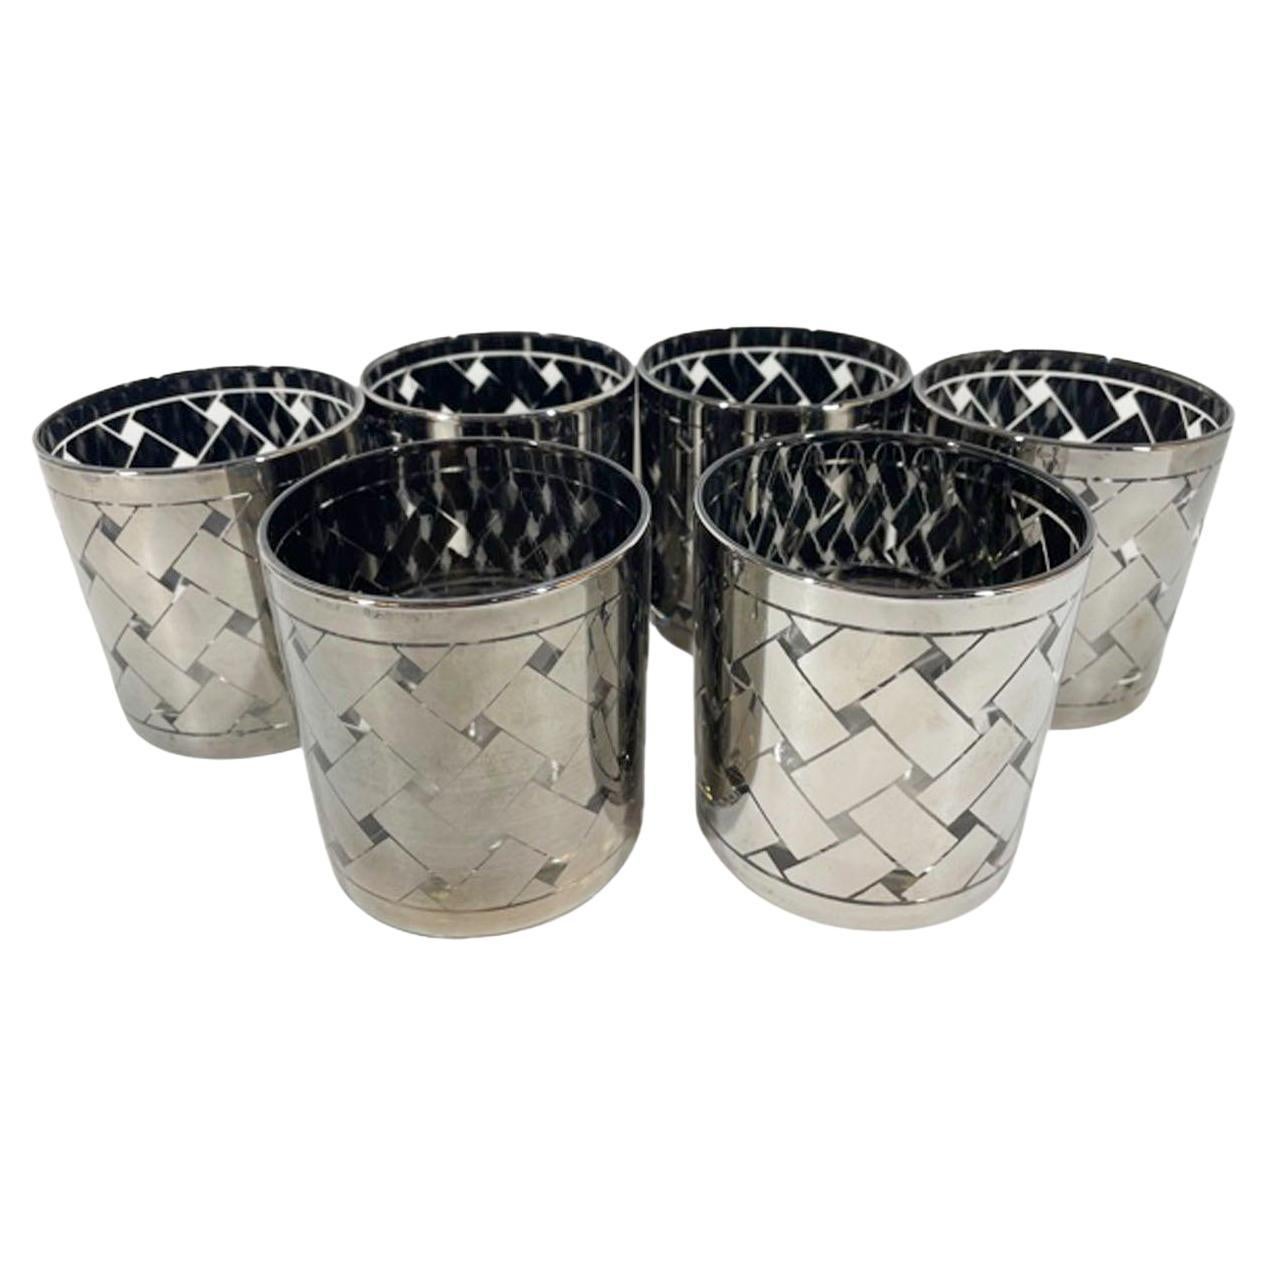 Six Mid-Century Modern Rocks Glasses Decorated in a Silver Basketweave Pattern